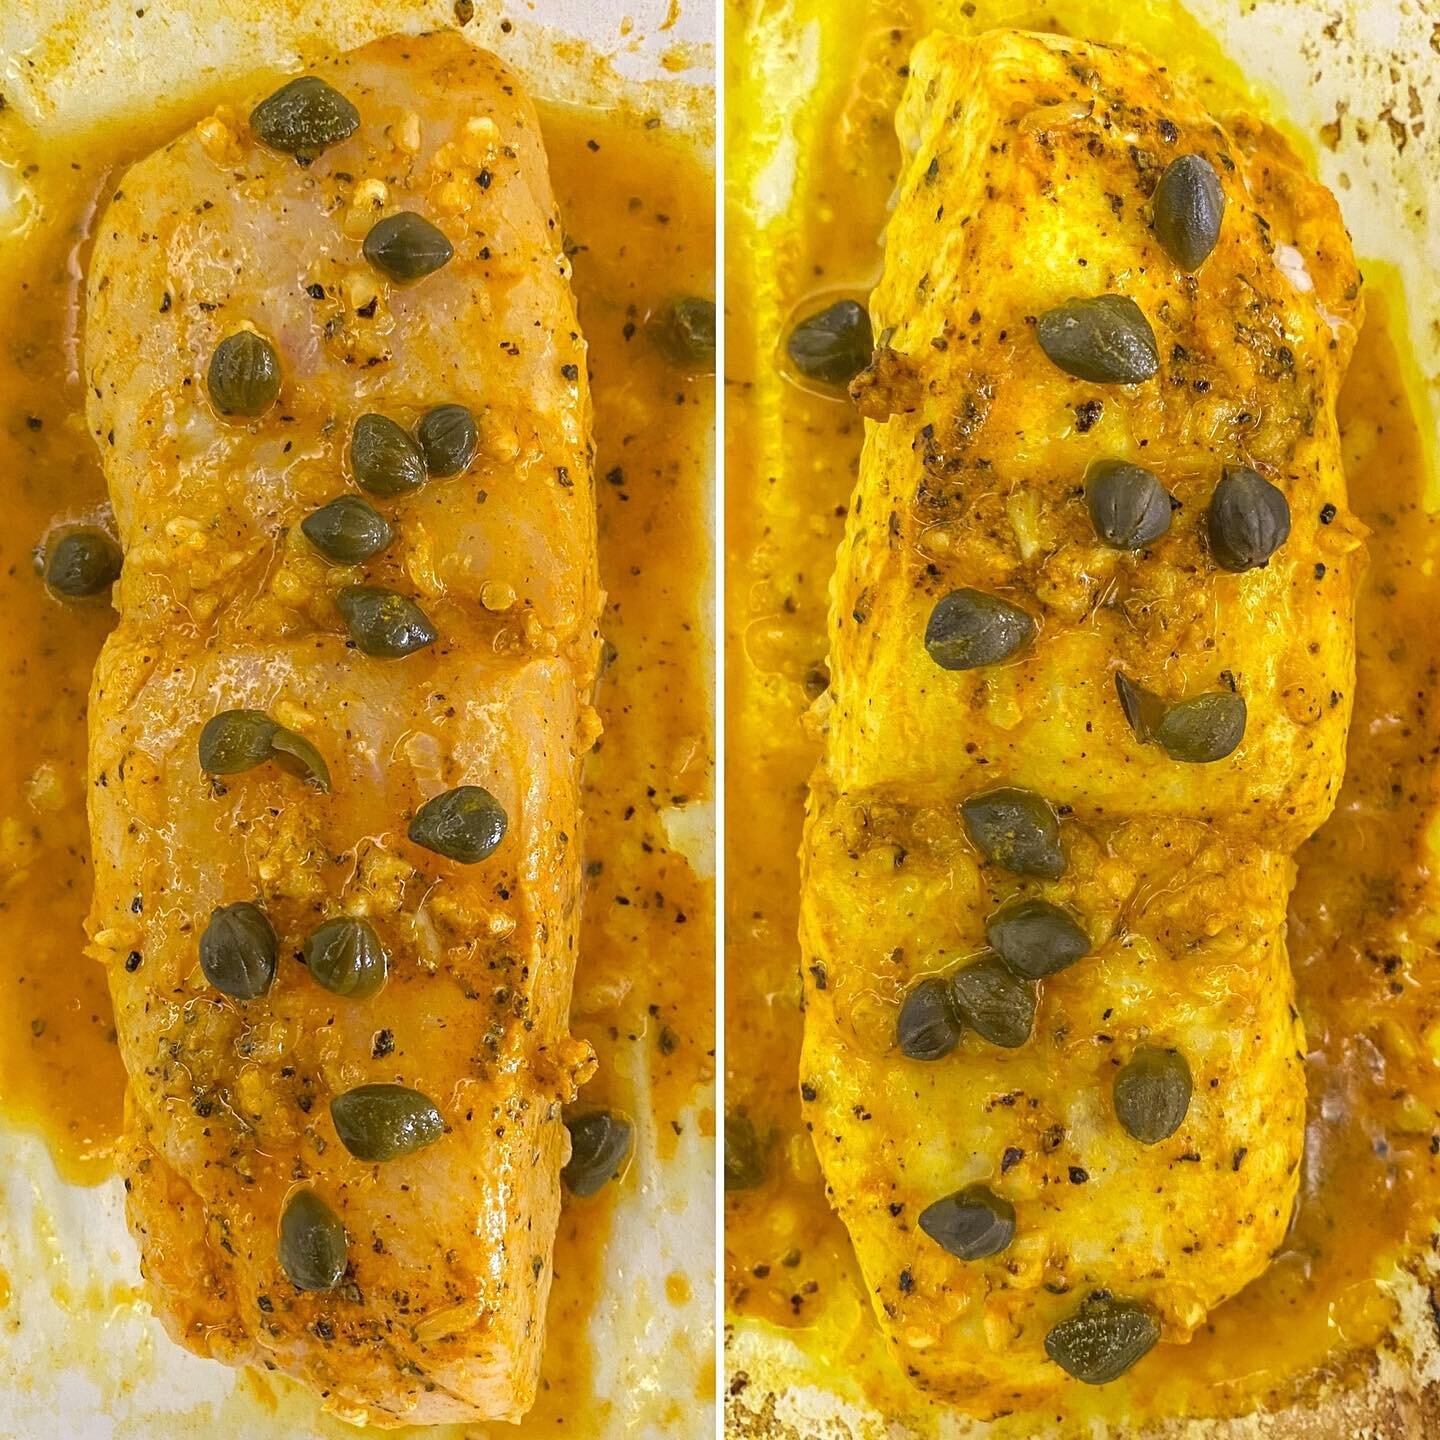 Turmeric-Lemon Halibut with Garlic and Capers.🍋 This is super easy, flavorful and nutritious. Perfect for any quick, weeknight dinner. Give it a try, recipe below.⁠⁠
⁠⁠
🐟Turmeric Halibut:⁠⁠
&frac12; pound or 1 pound of a halibut fillet⁠⁠
&frac12; t